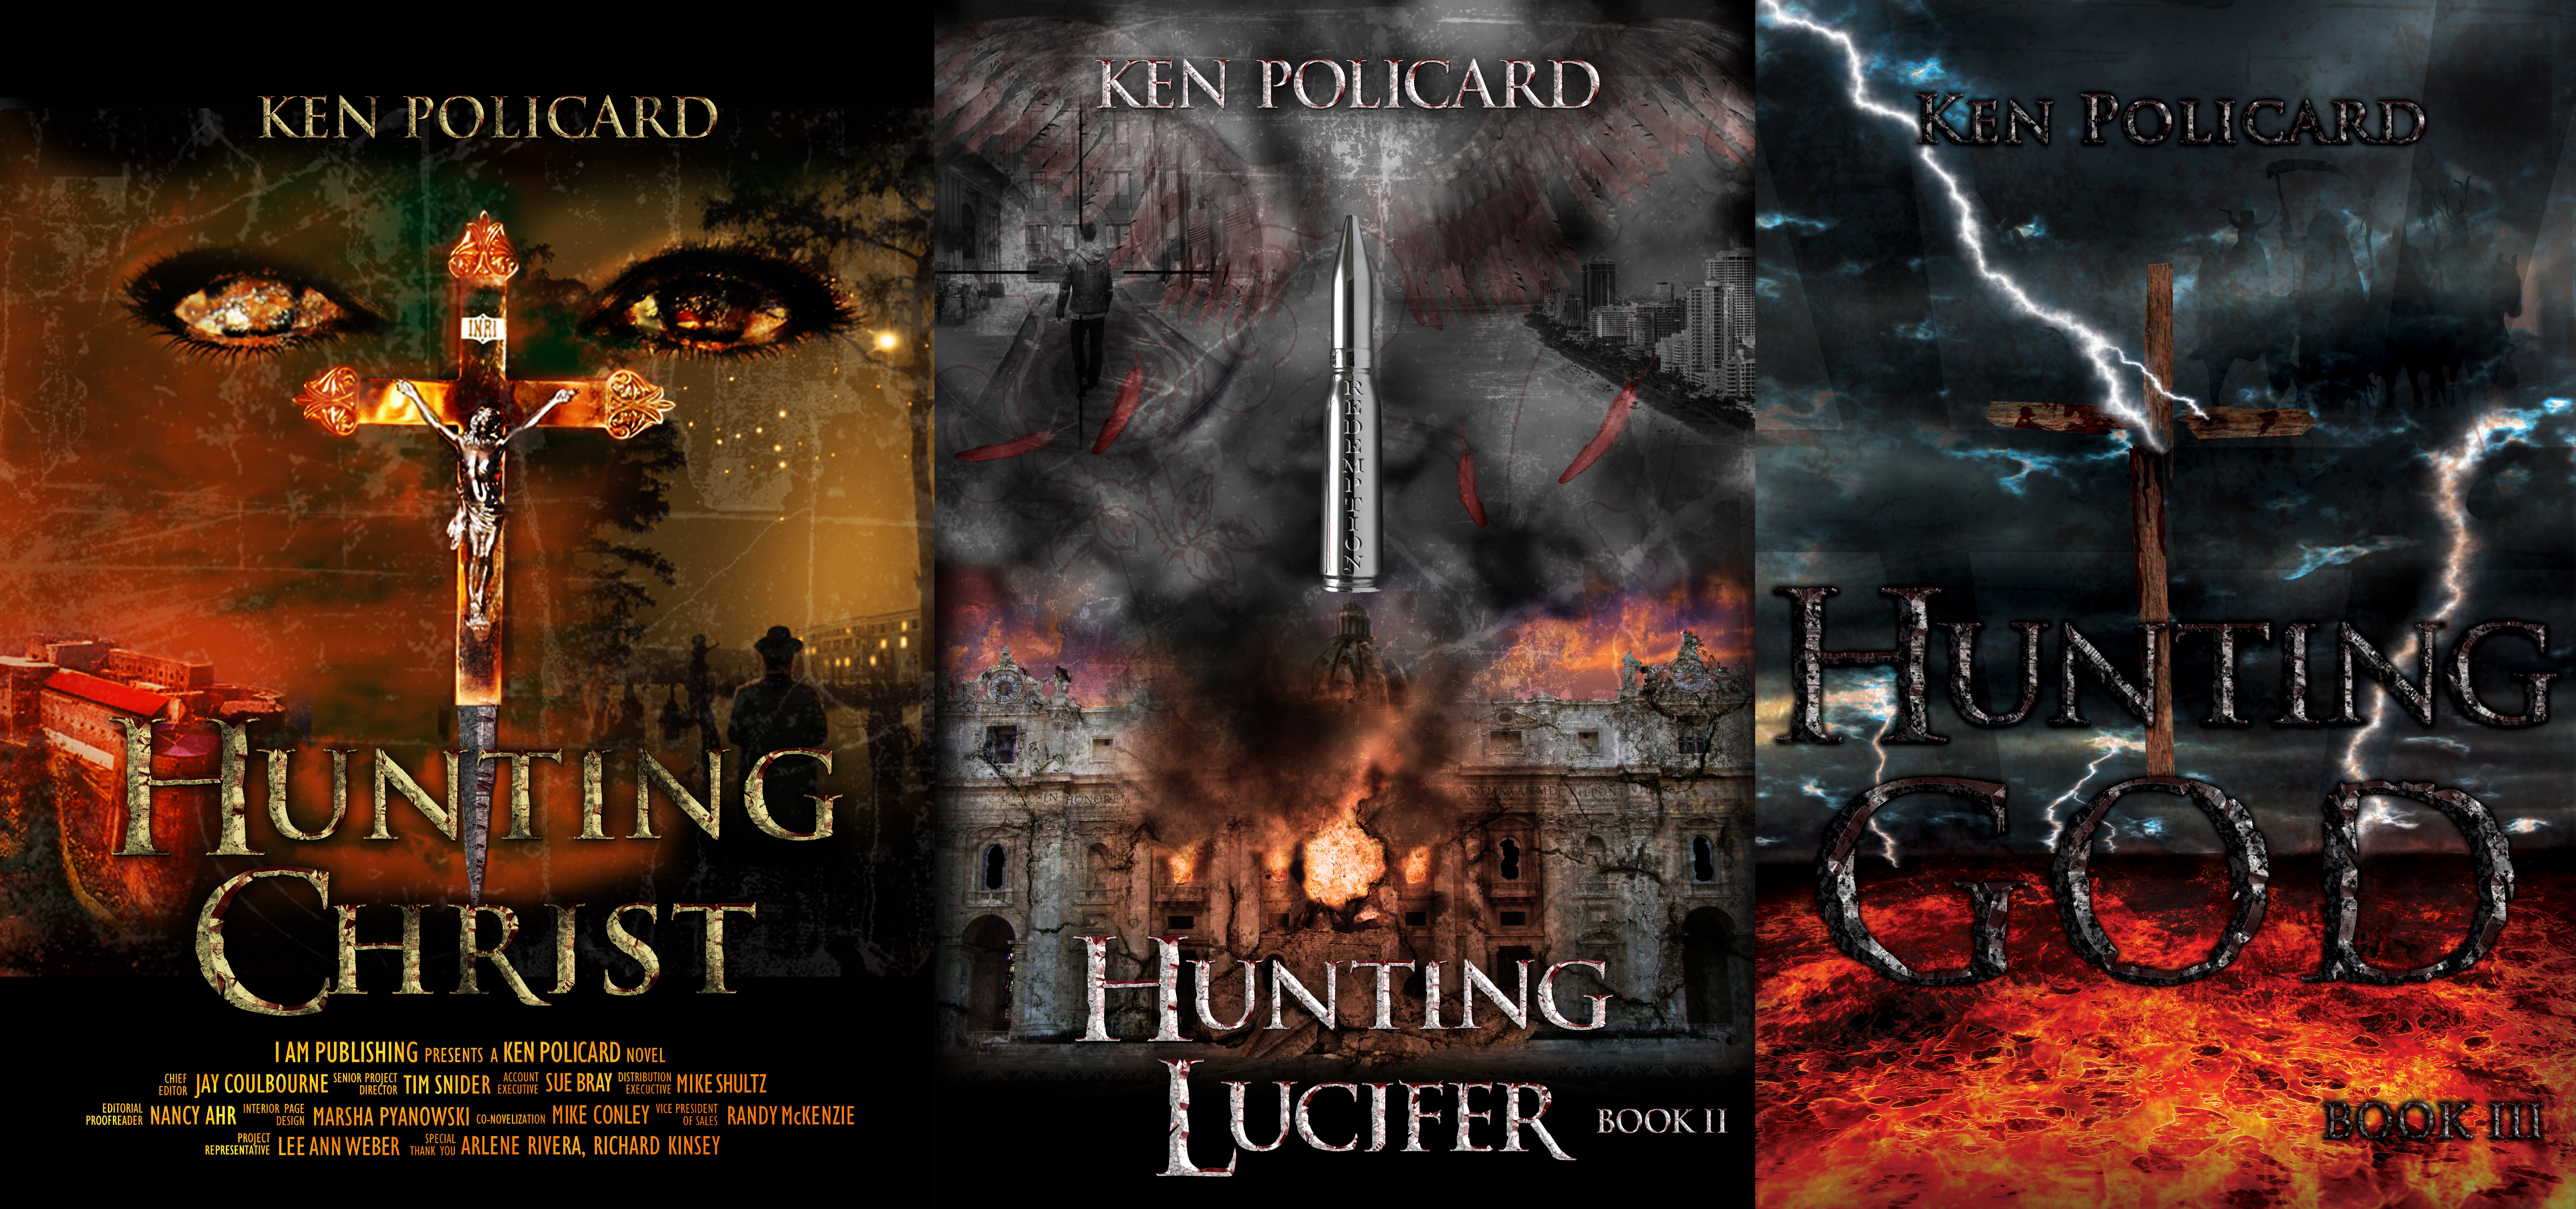 THE HUNTING TRILOGY